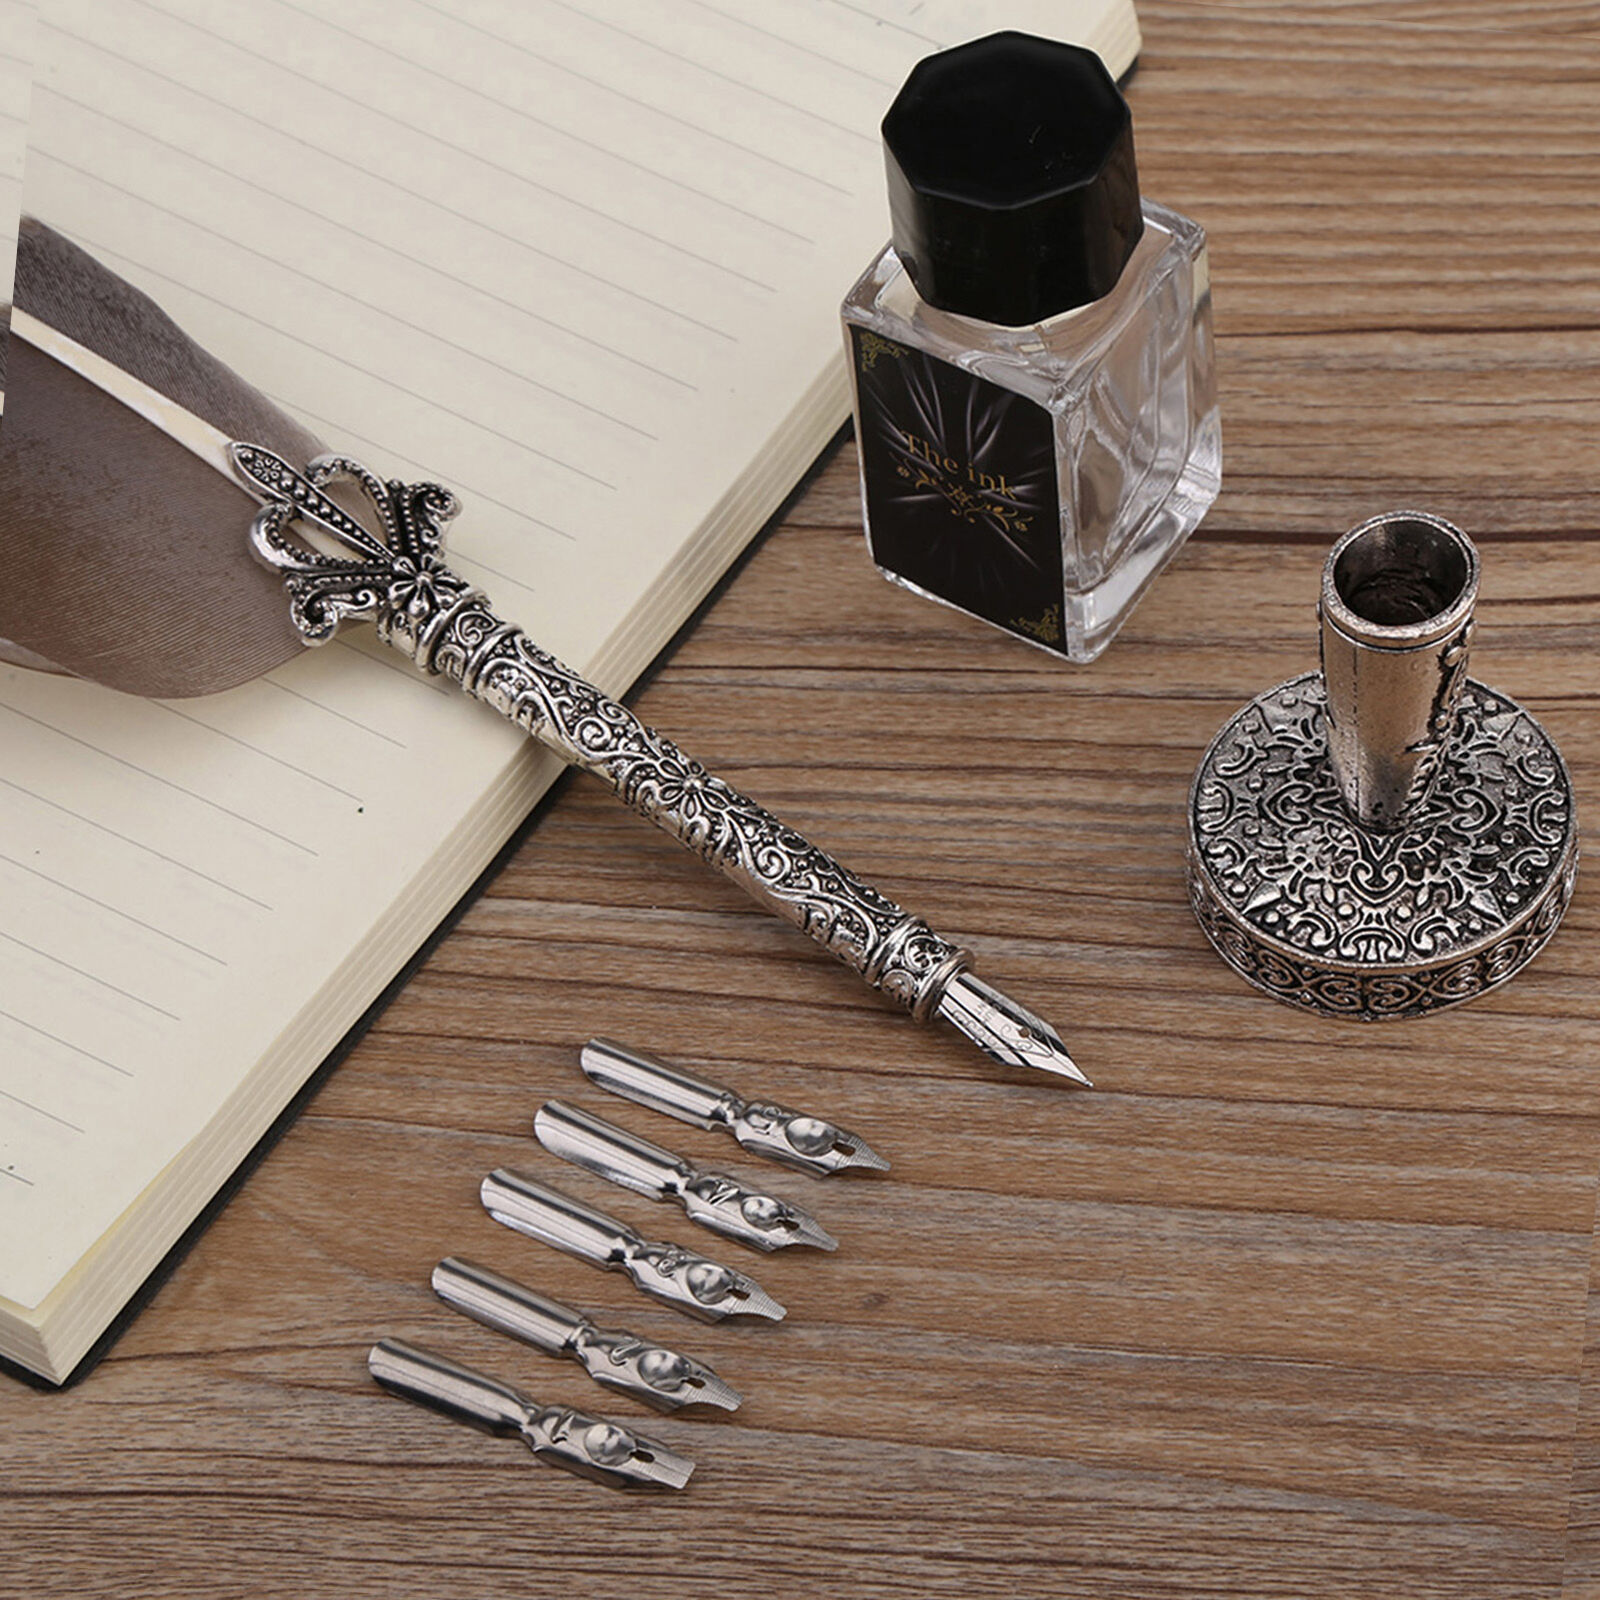  Quill Pen Set English Calligraphy Writing Ink Stationery Gift EUY